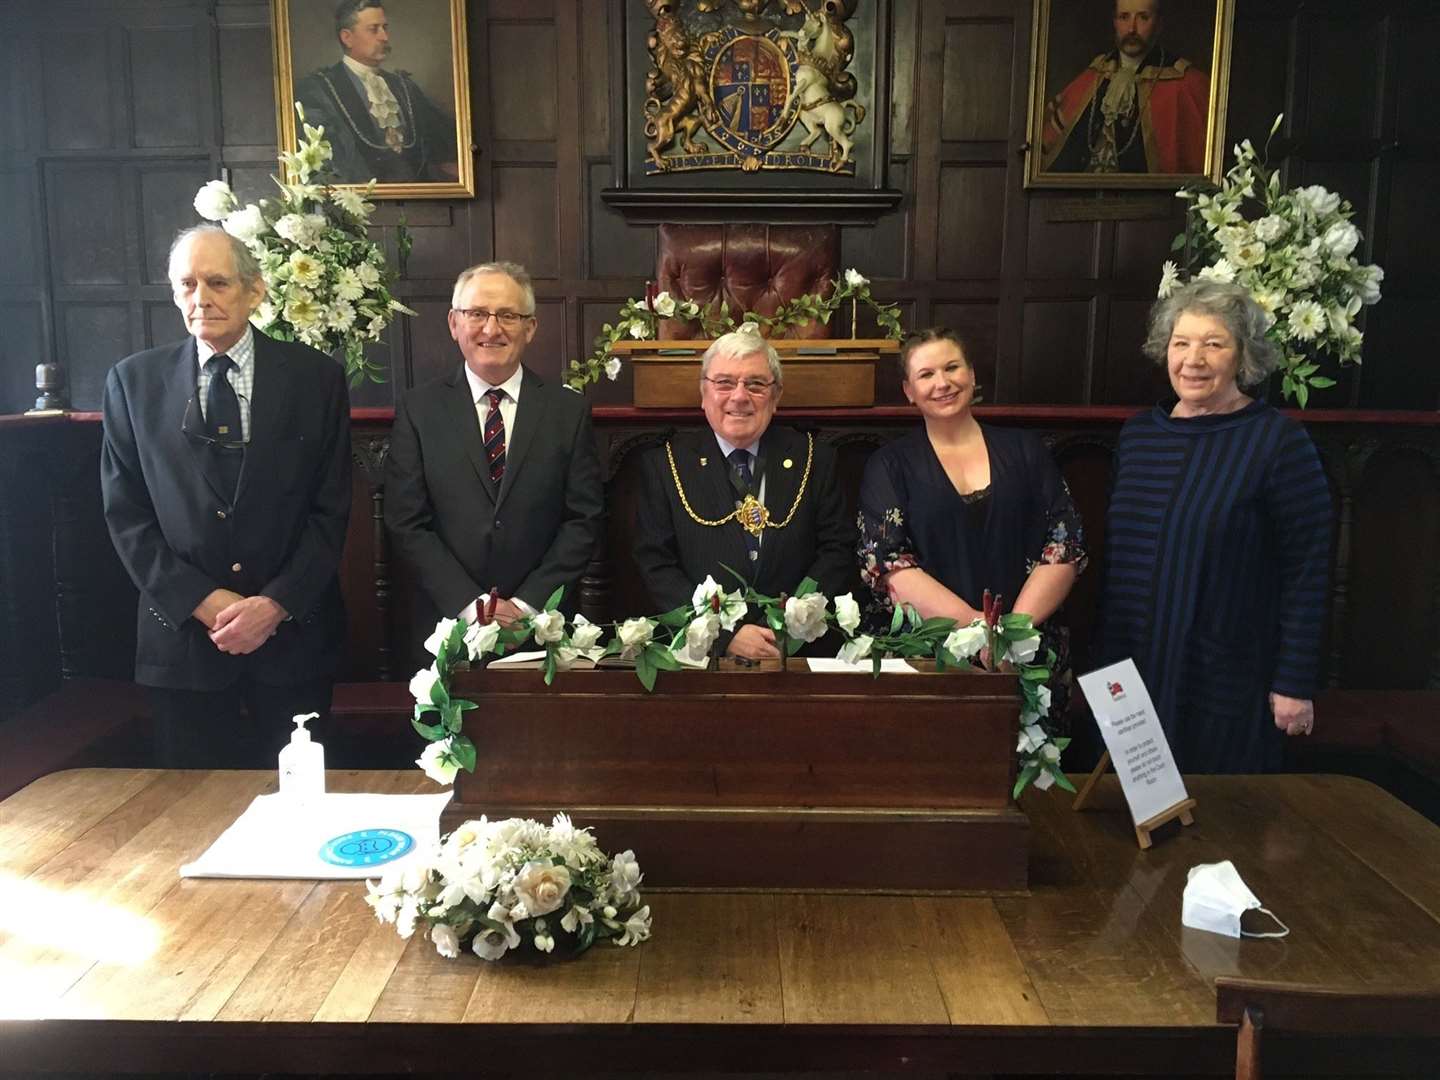 The new councillors were sworn in on Saturday by the Mayor Cllr Paul Graeme Picture: Sandwich Town Council